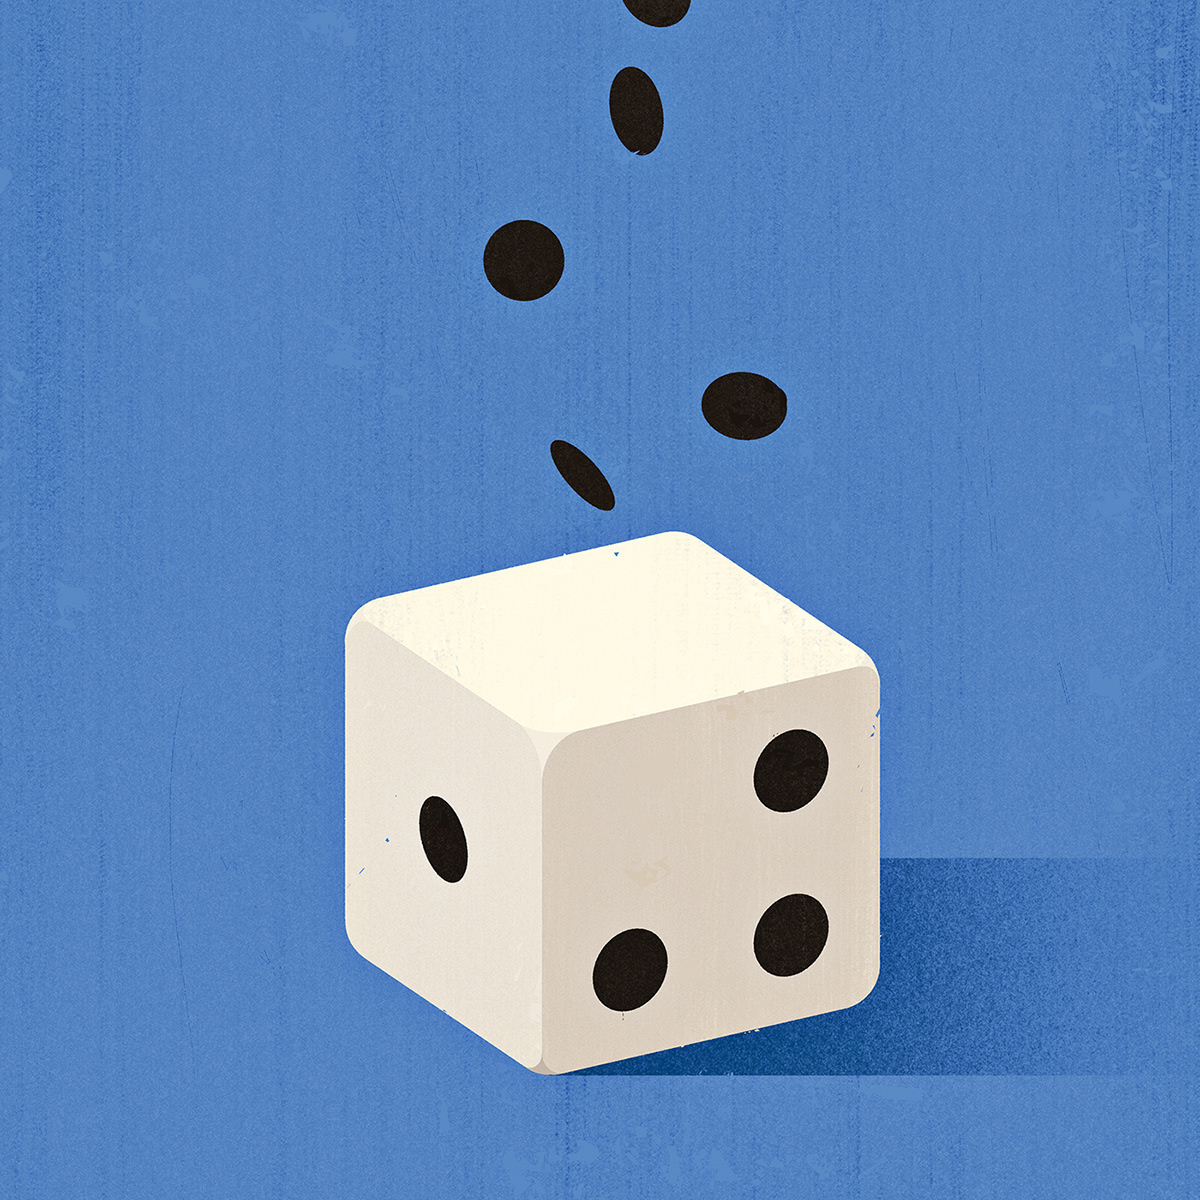 Illustration of a dice